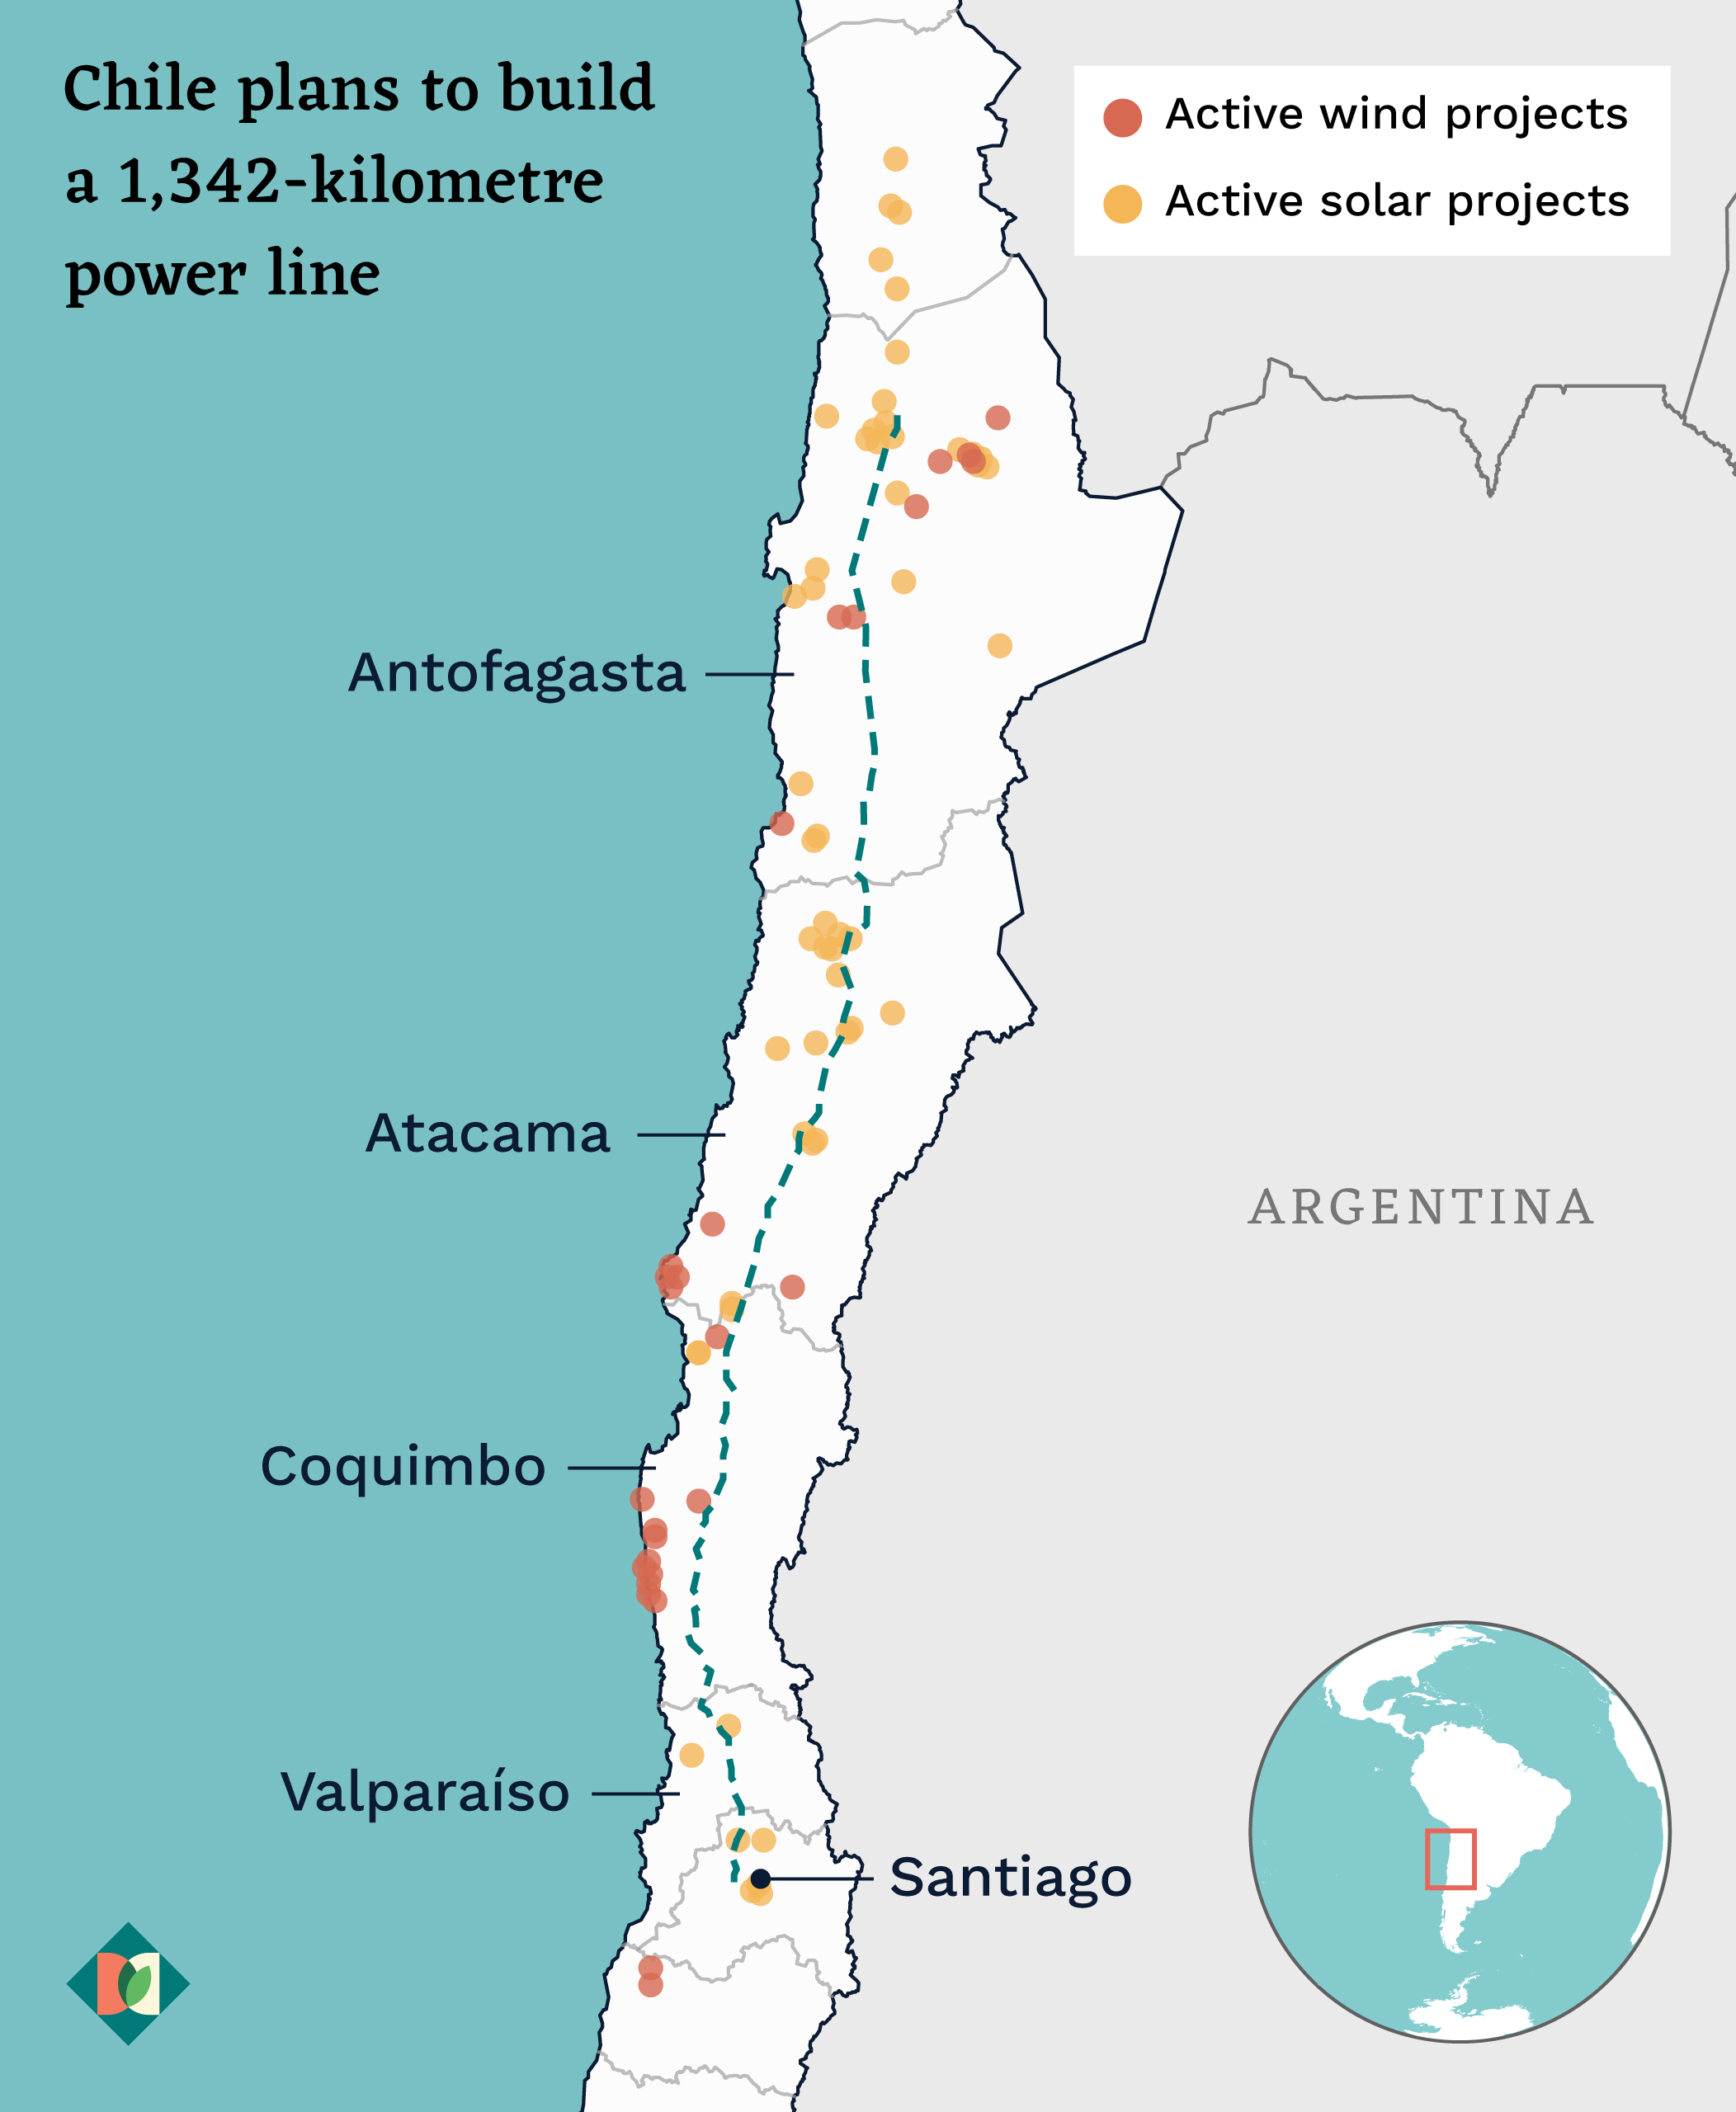 Chile's longest power line could speed up the shift to renewables